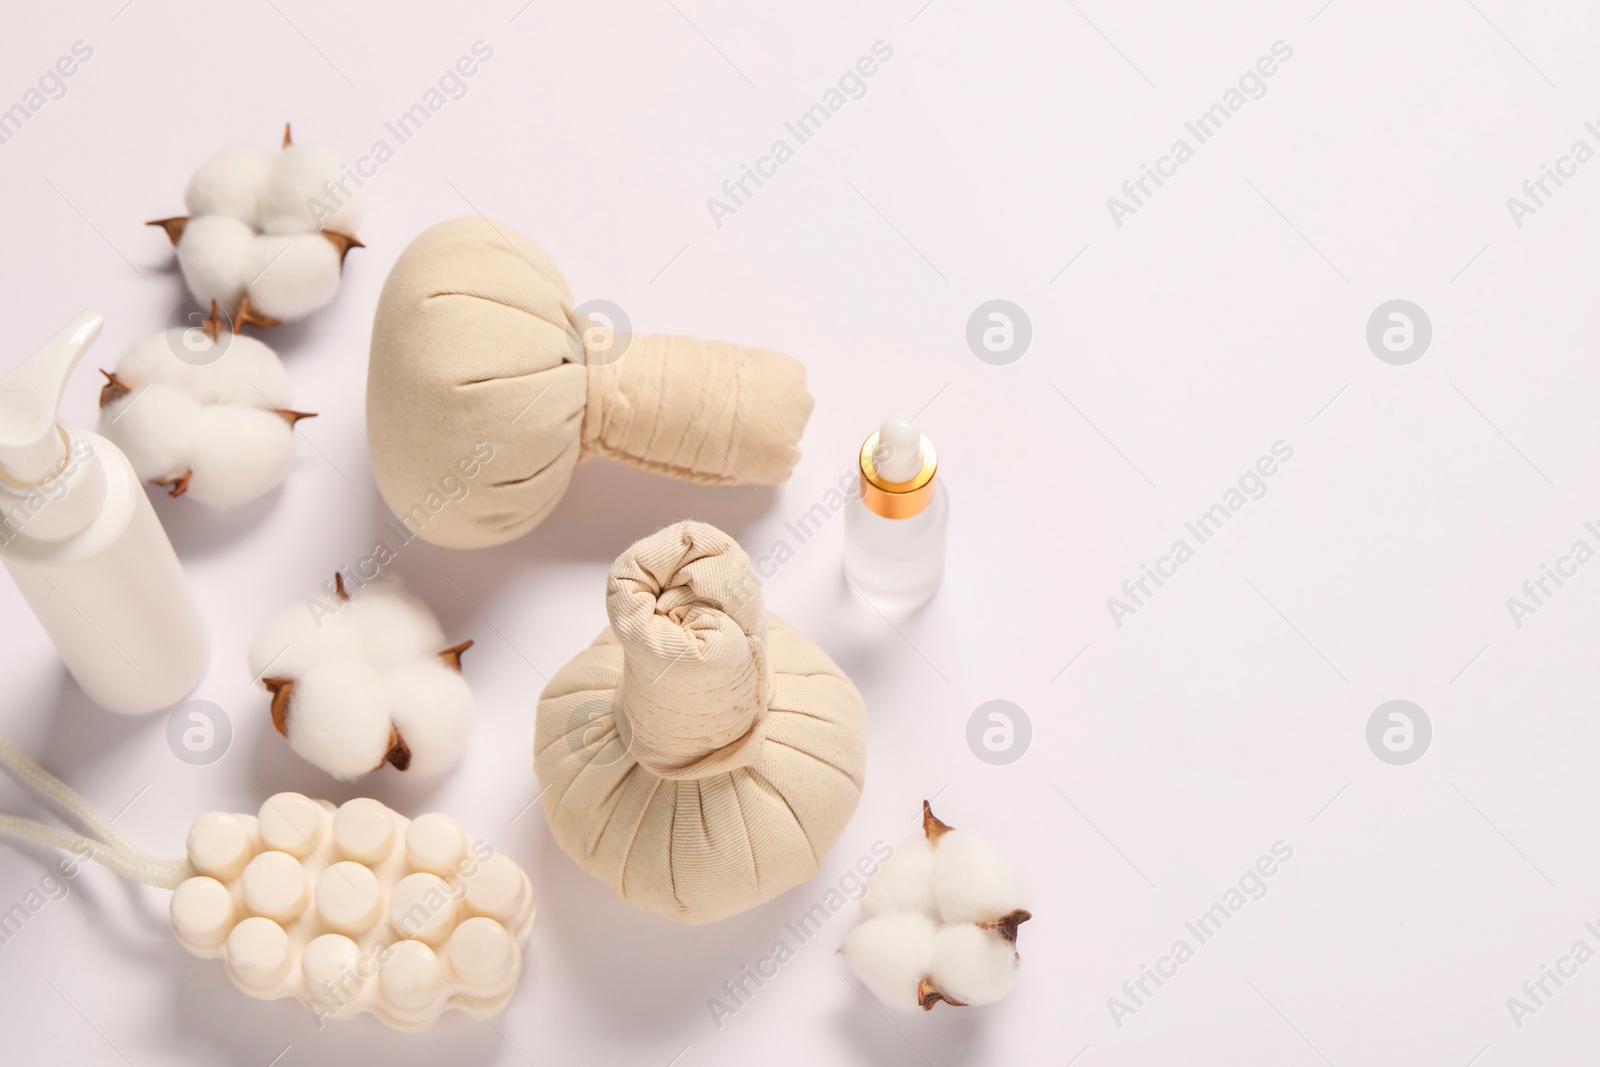 Photo of Bath accessories. Different personal care products and cotton flowers on white background, above view with space for text